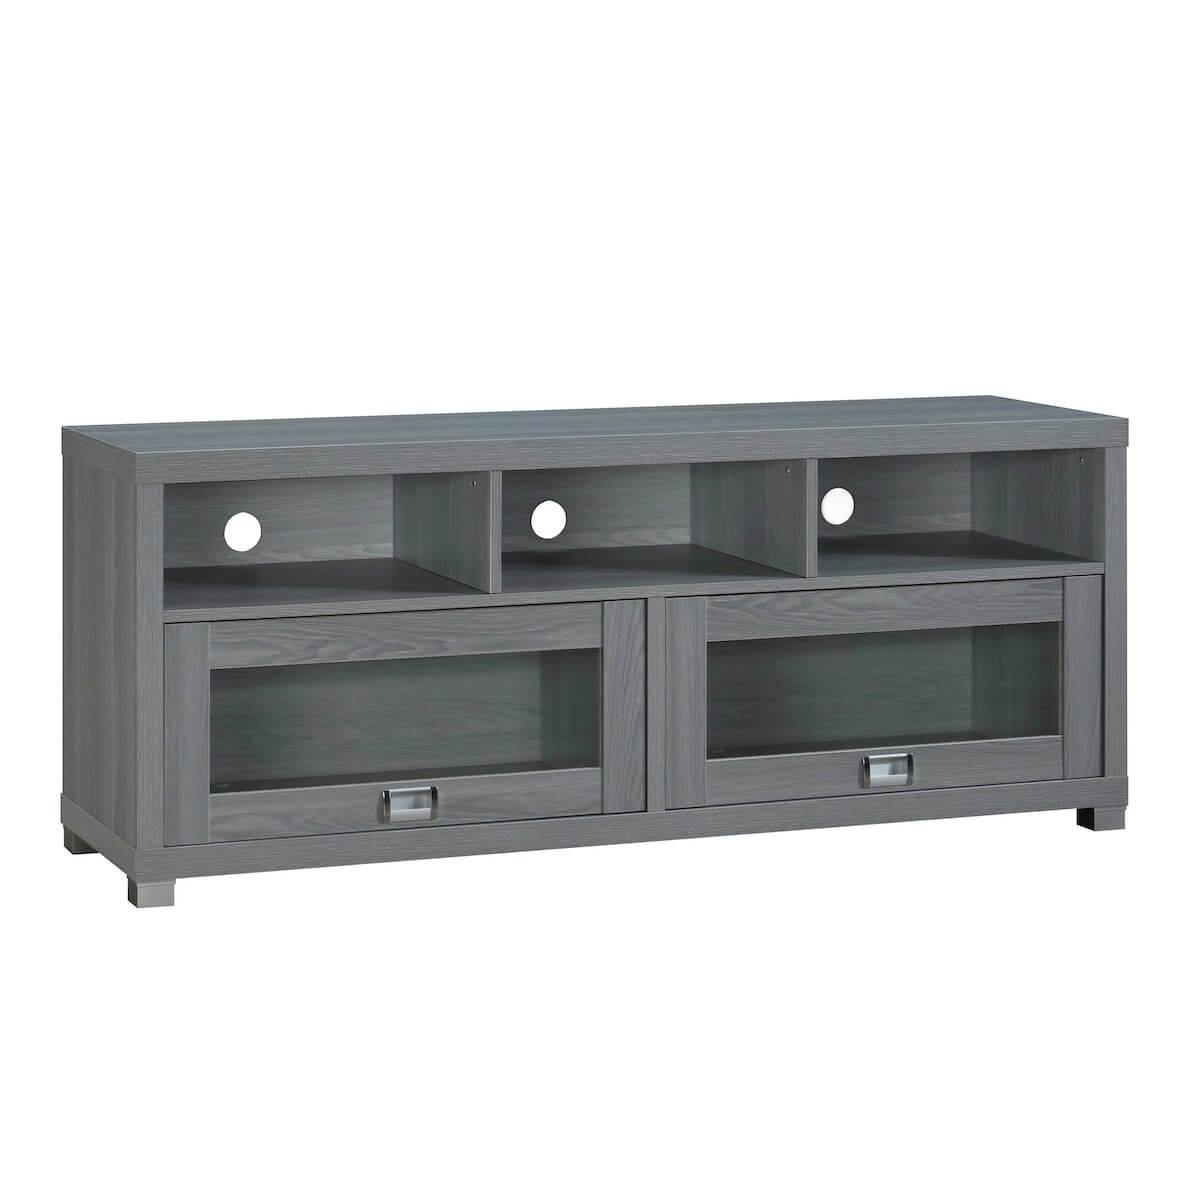 Techni Mobili Gray Durbin TV Stand for TVs up to 65" RTA-8850-GRY